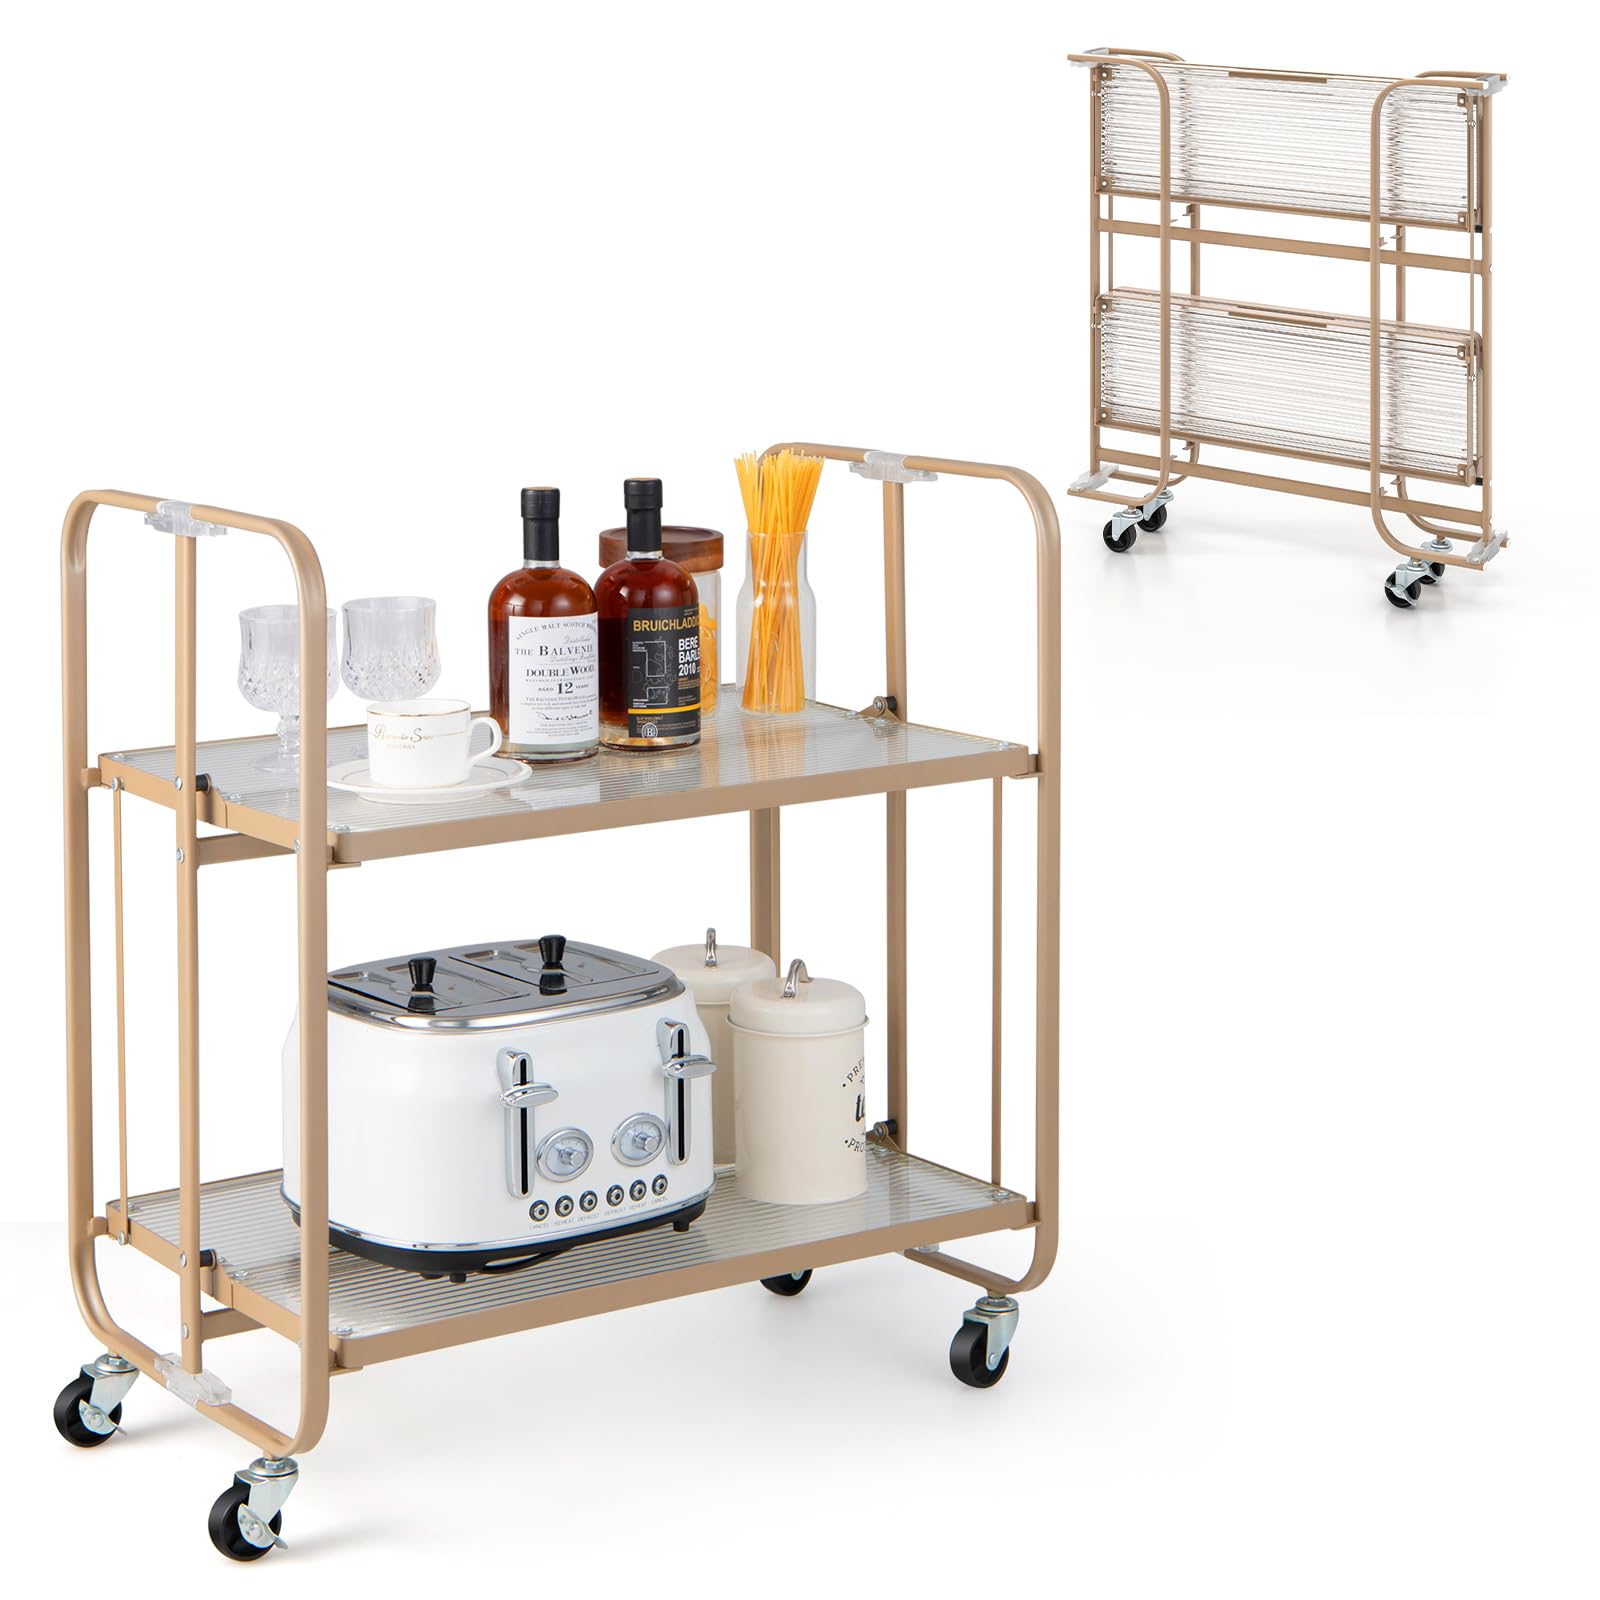 LOKO 2-Tier Foldable Bar Cart on Wheels, Mobile Home Bar & Serving Cart with Tempered Glass Shelf, Rolling Kitchen Island Cart with Powder-Coated Metal Frame, for Dining Room Living Room, Rose Gold